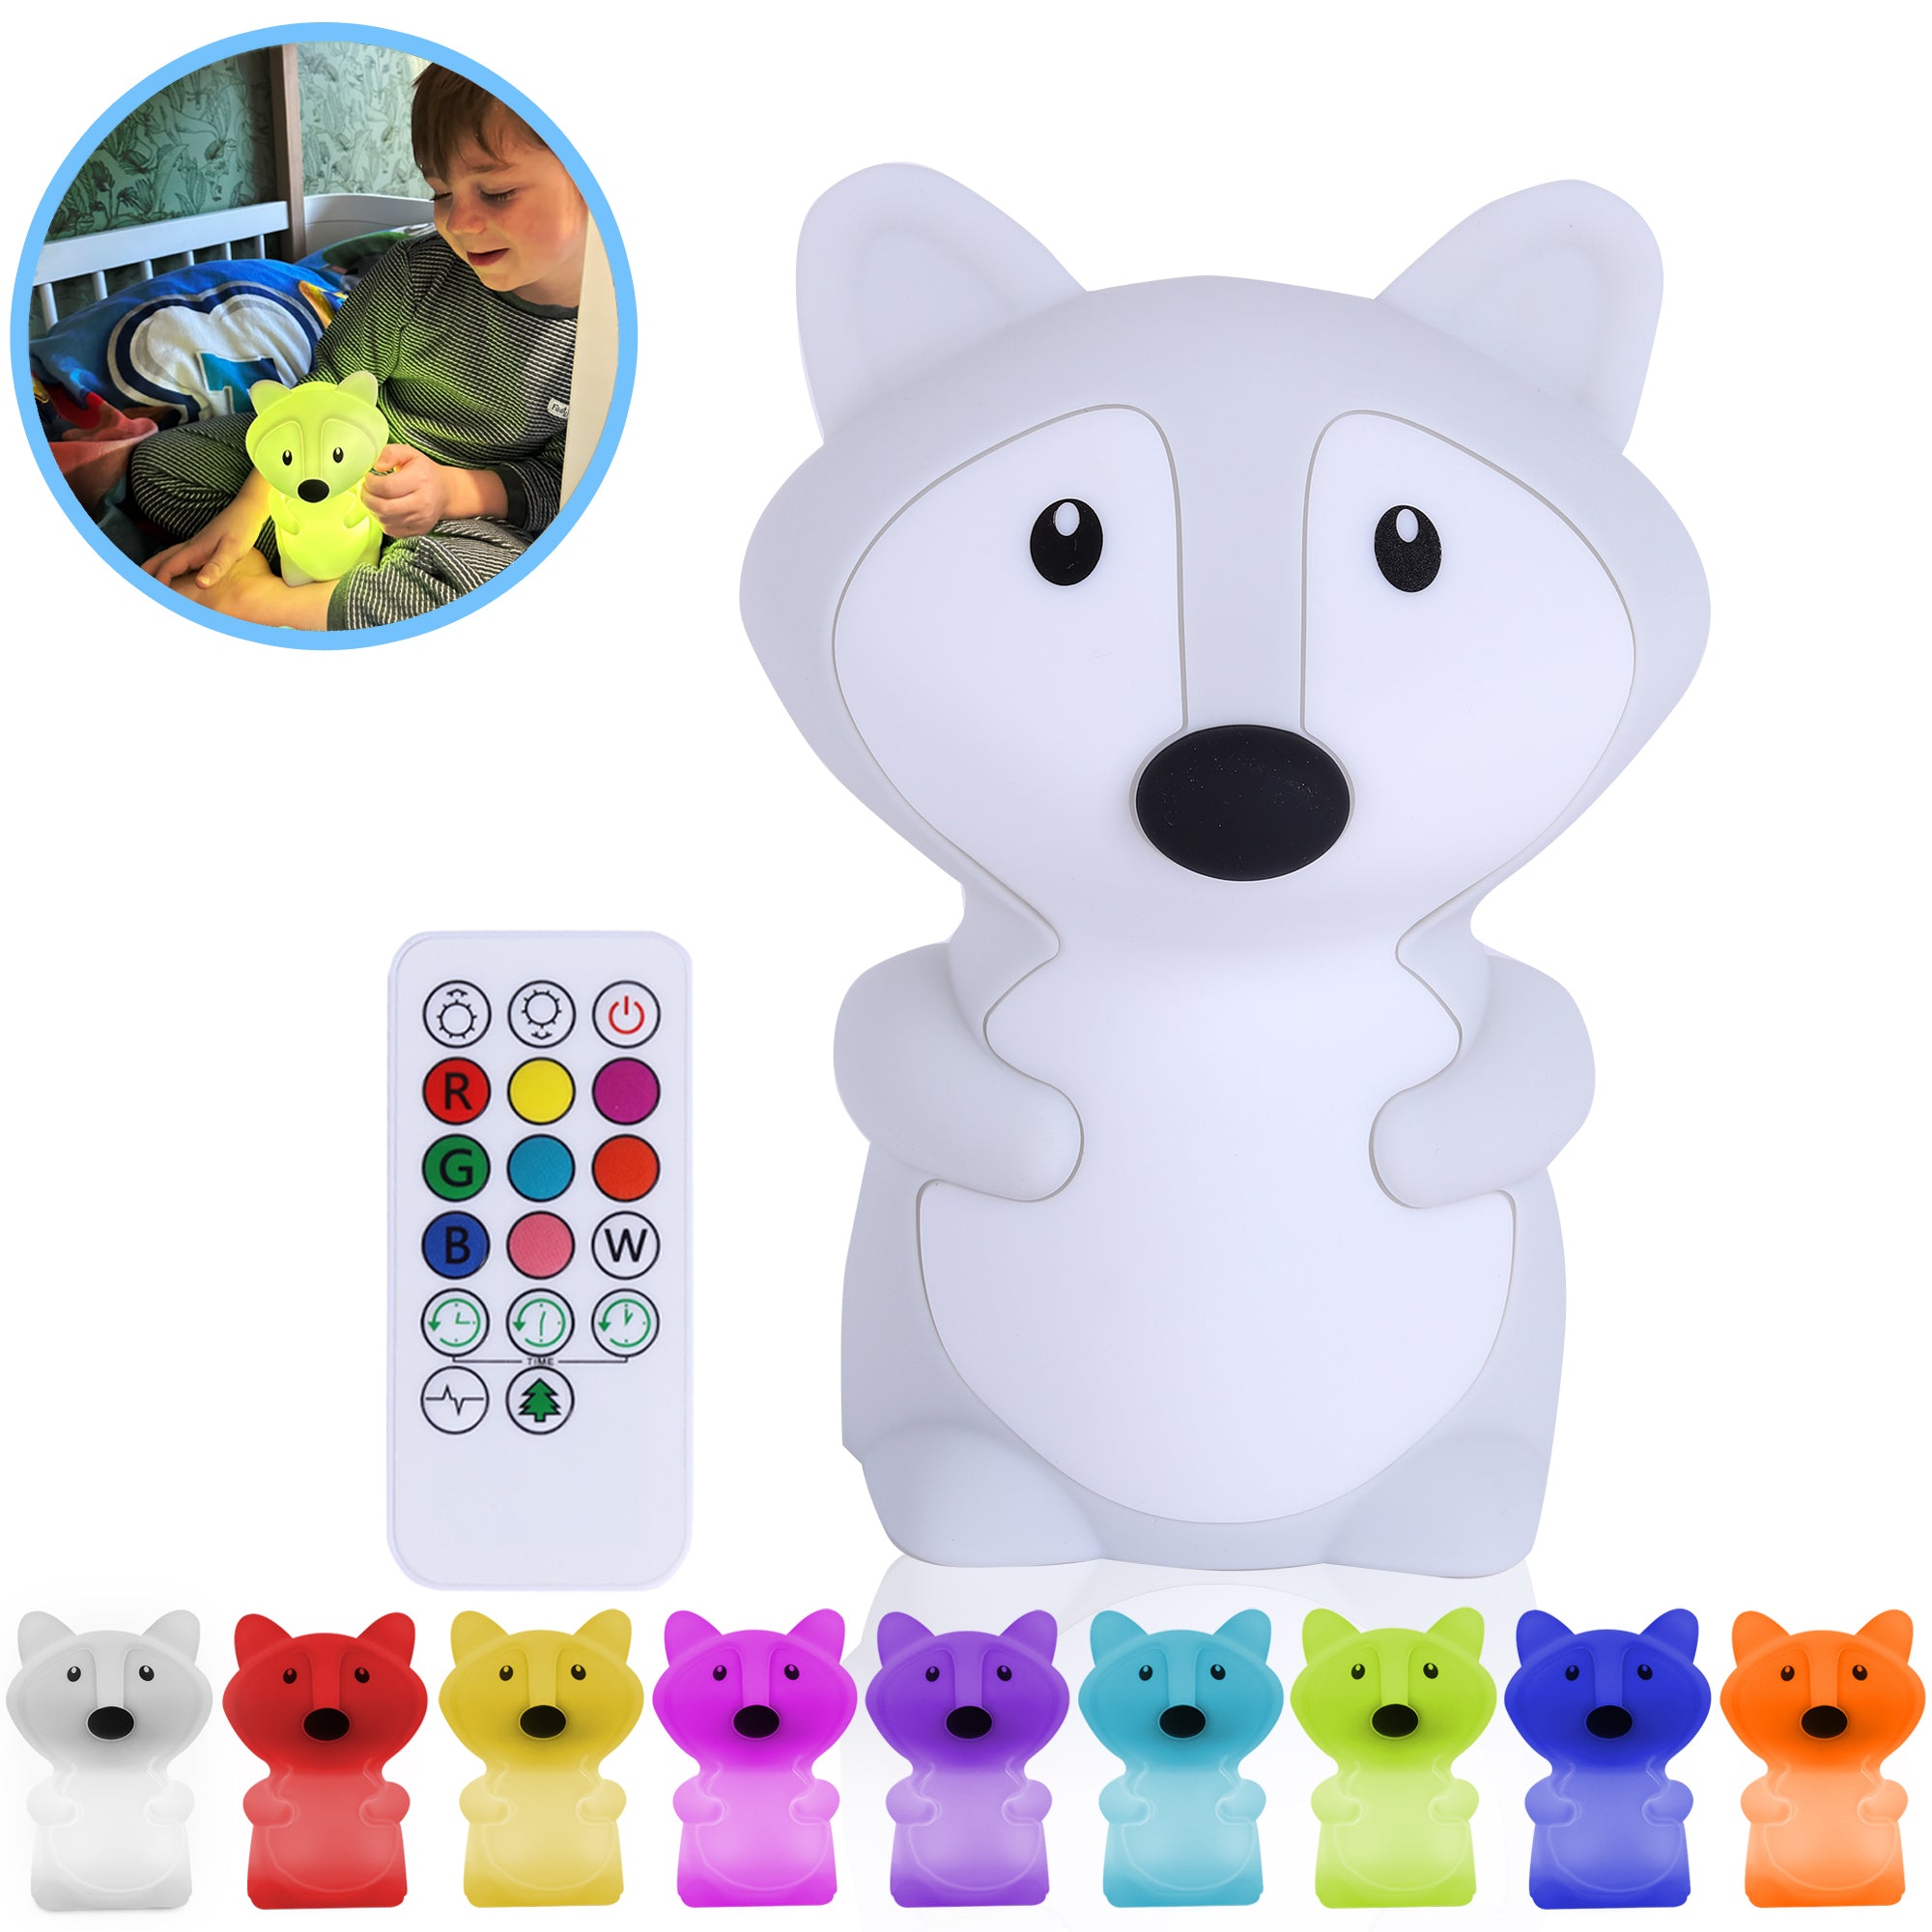 Fox Night Lamp with Remote Control & TAP-ON function